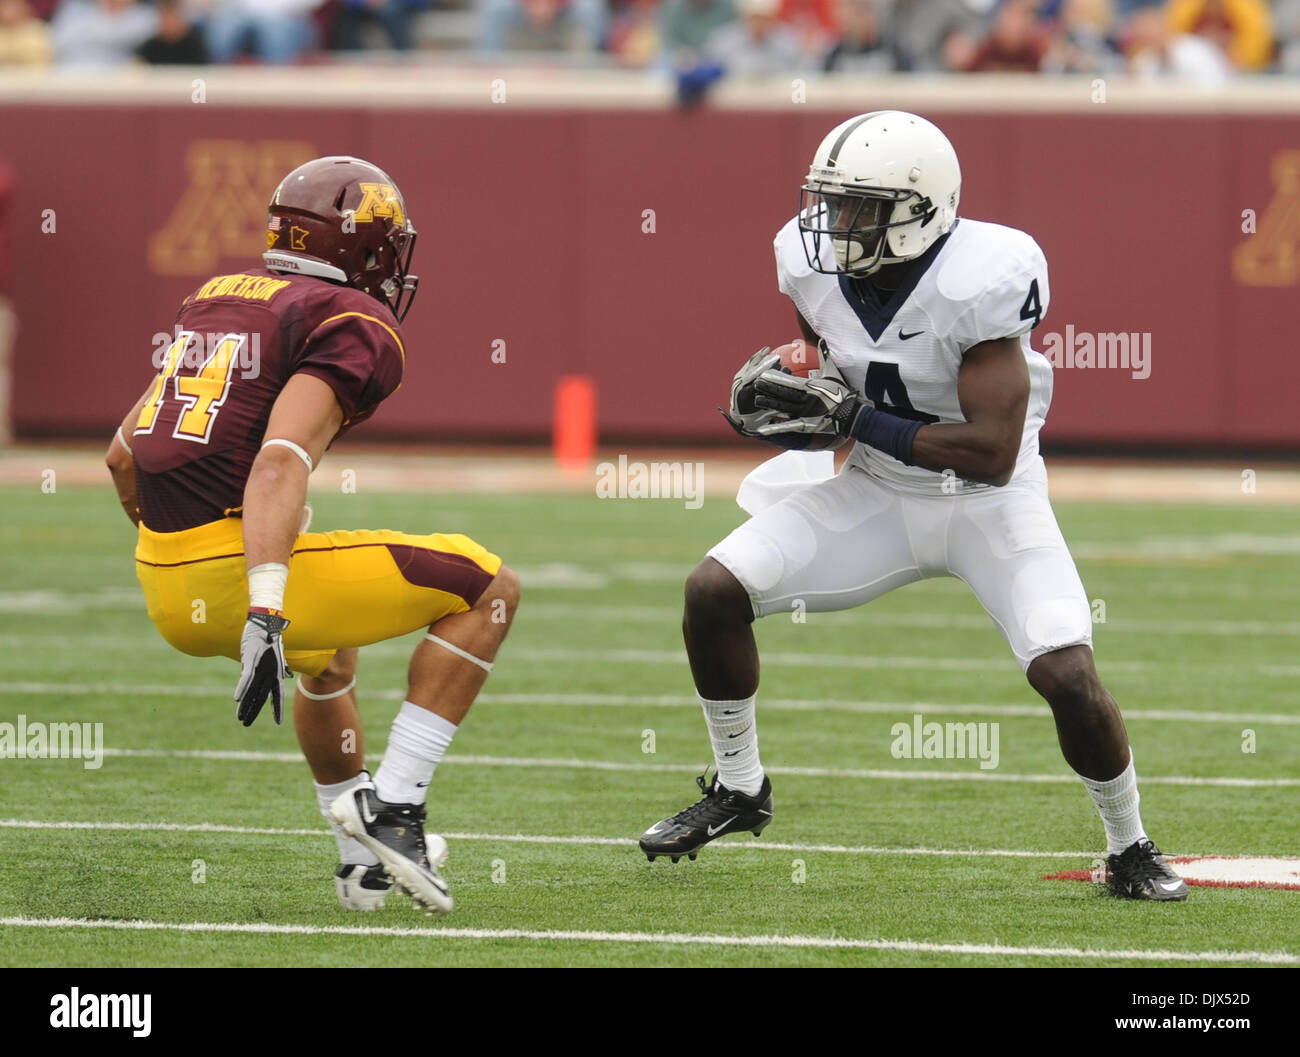 Oct. 23, 2010 - Minneapolis, Minnesota, United States of America - Penn State University wide receiver Shawney Kersey (#4) makes the catch for a 3 yard gain in the fourth quarter of the game between the Minnesota Gophers and the Penn State Nittany Lions at the TCF Stadium in Minneapolis, Minnesota.  Penn State defeats  Minnesota 33-21. (Credit Image: © Marilyn Indahl/Southcreek Glo Stock Photo